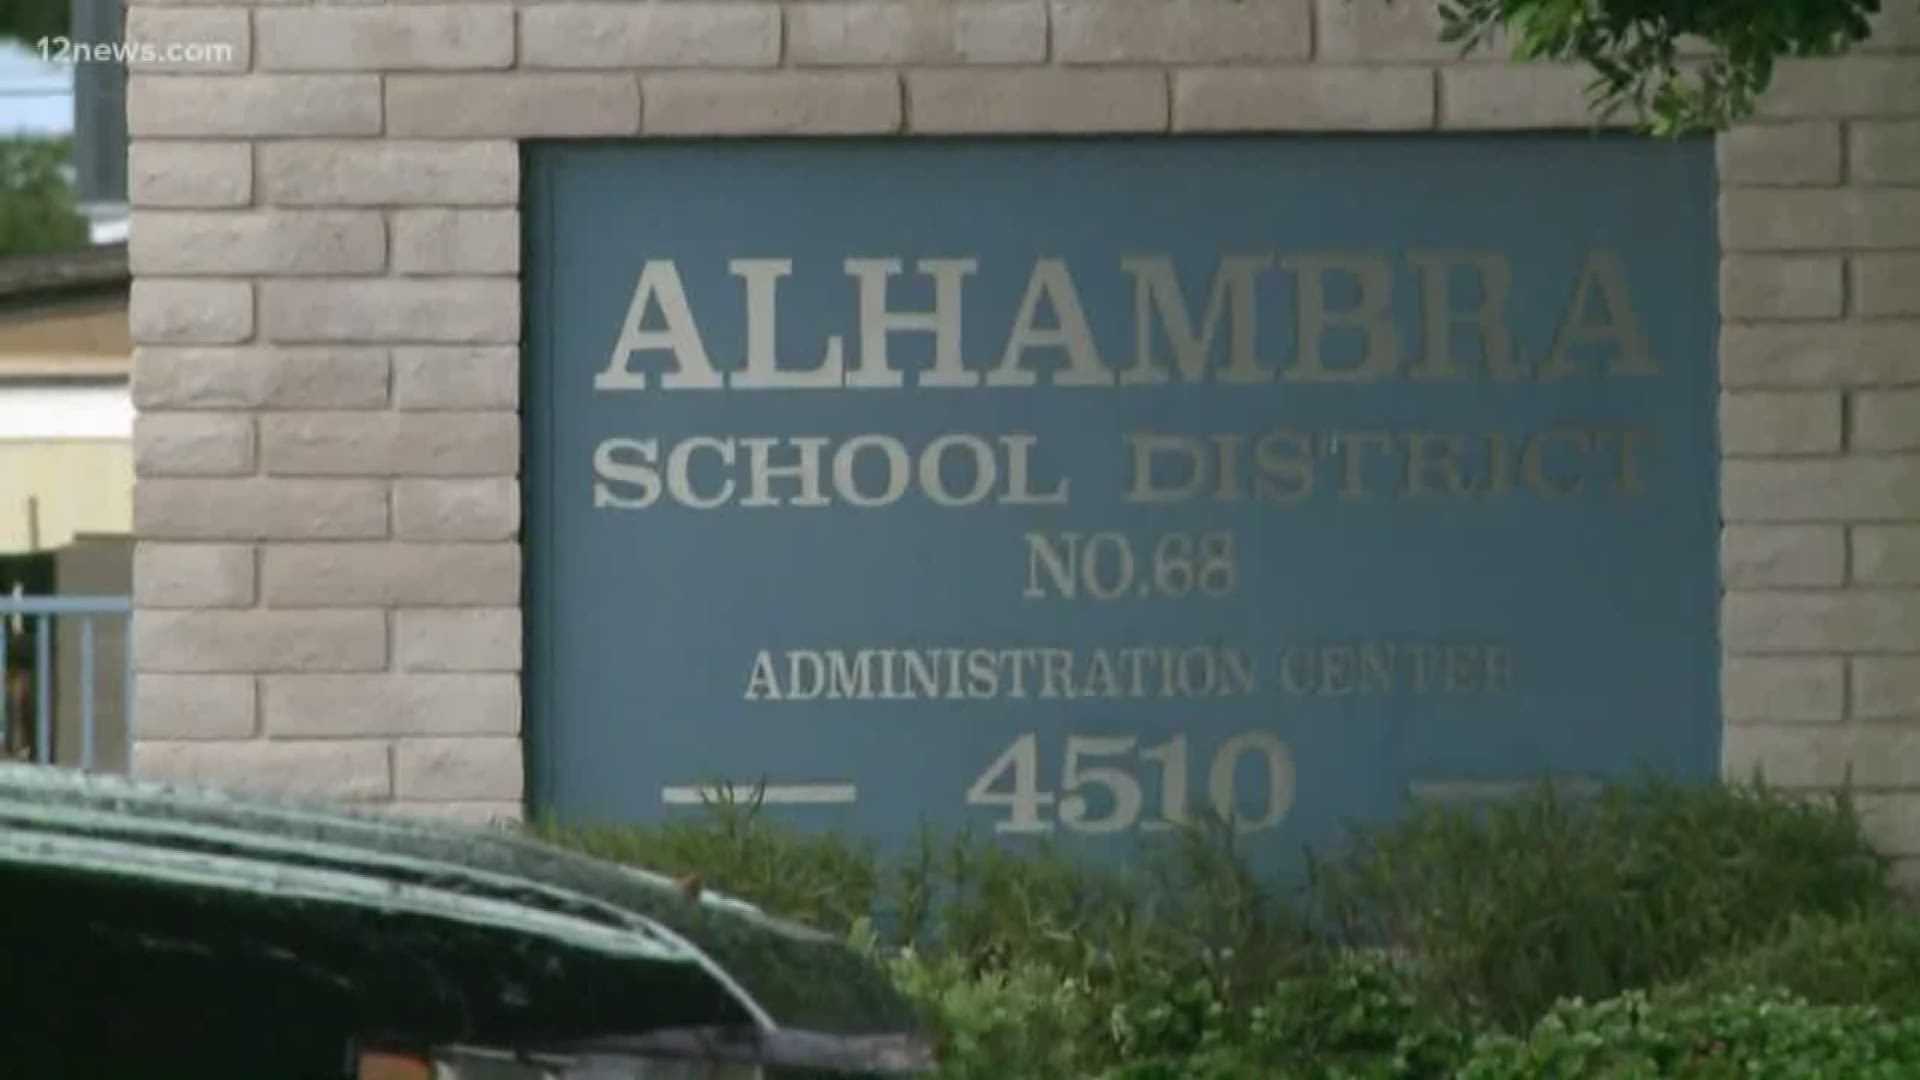 The Alhambra School District, NAU and GCU have canceled classes or will move classes online due to the coronavirus. The LDS Church is canceling gatherings too.